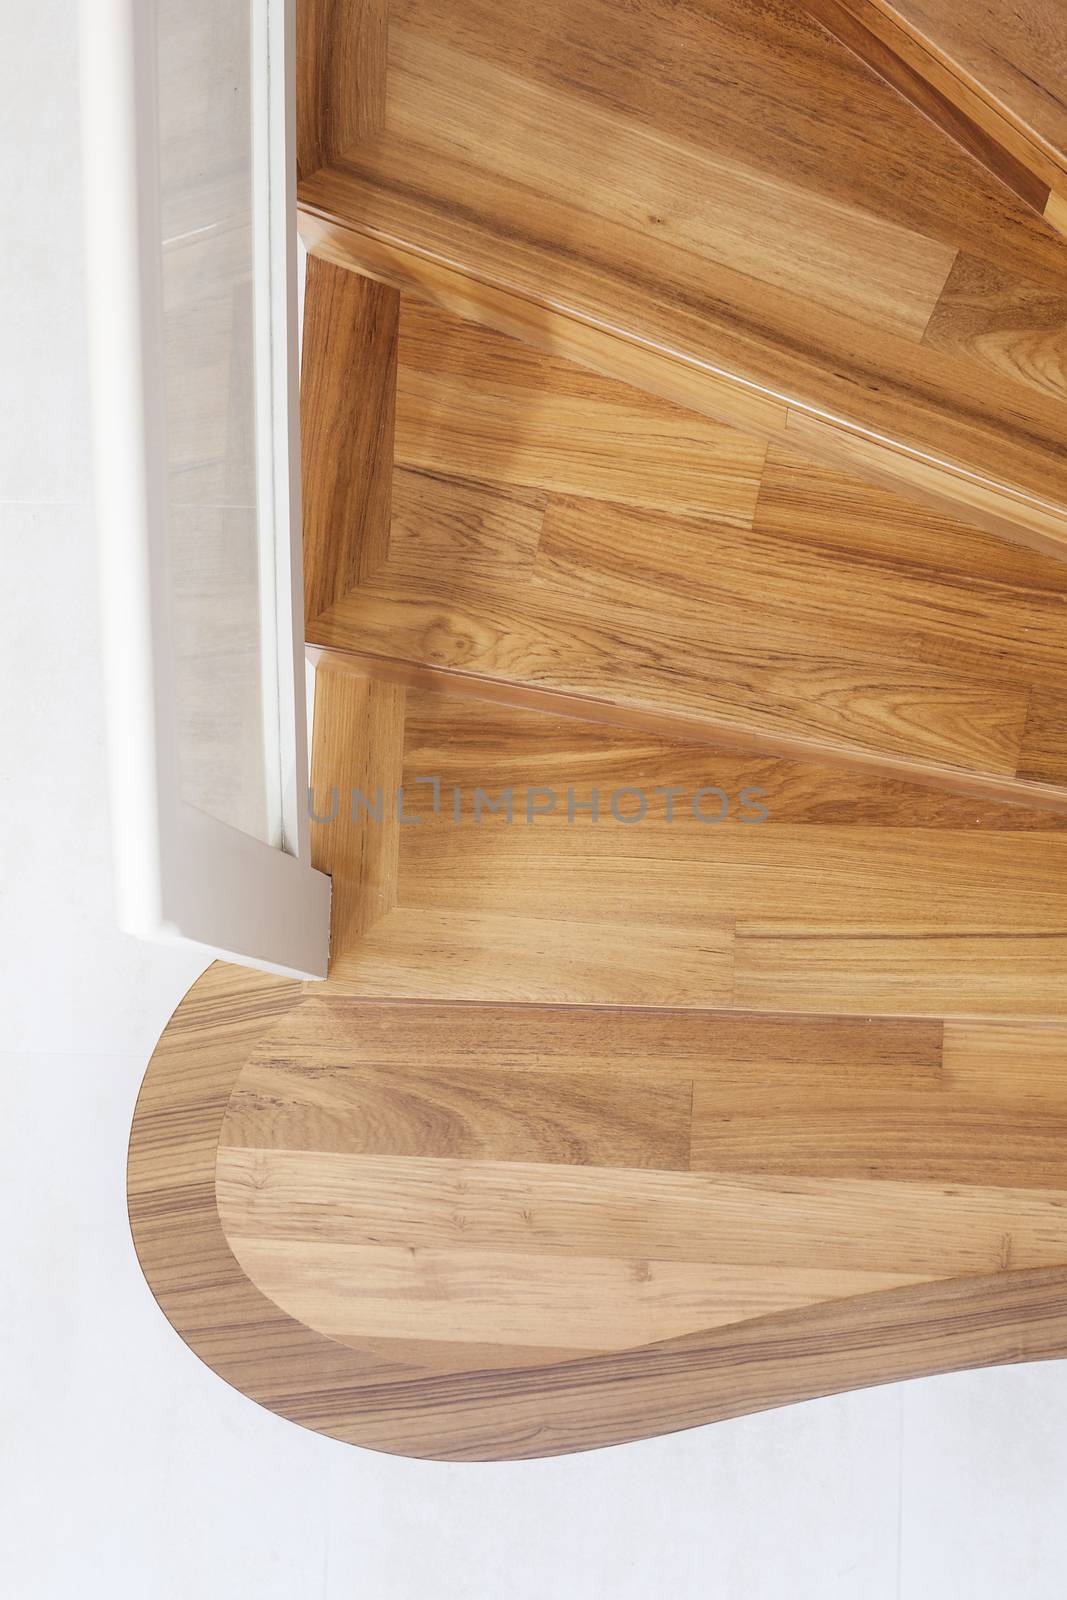 Part of interior wooden stairs 